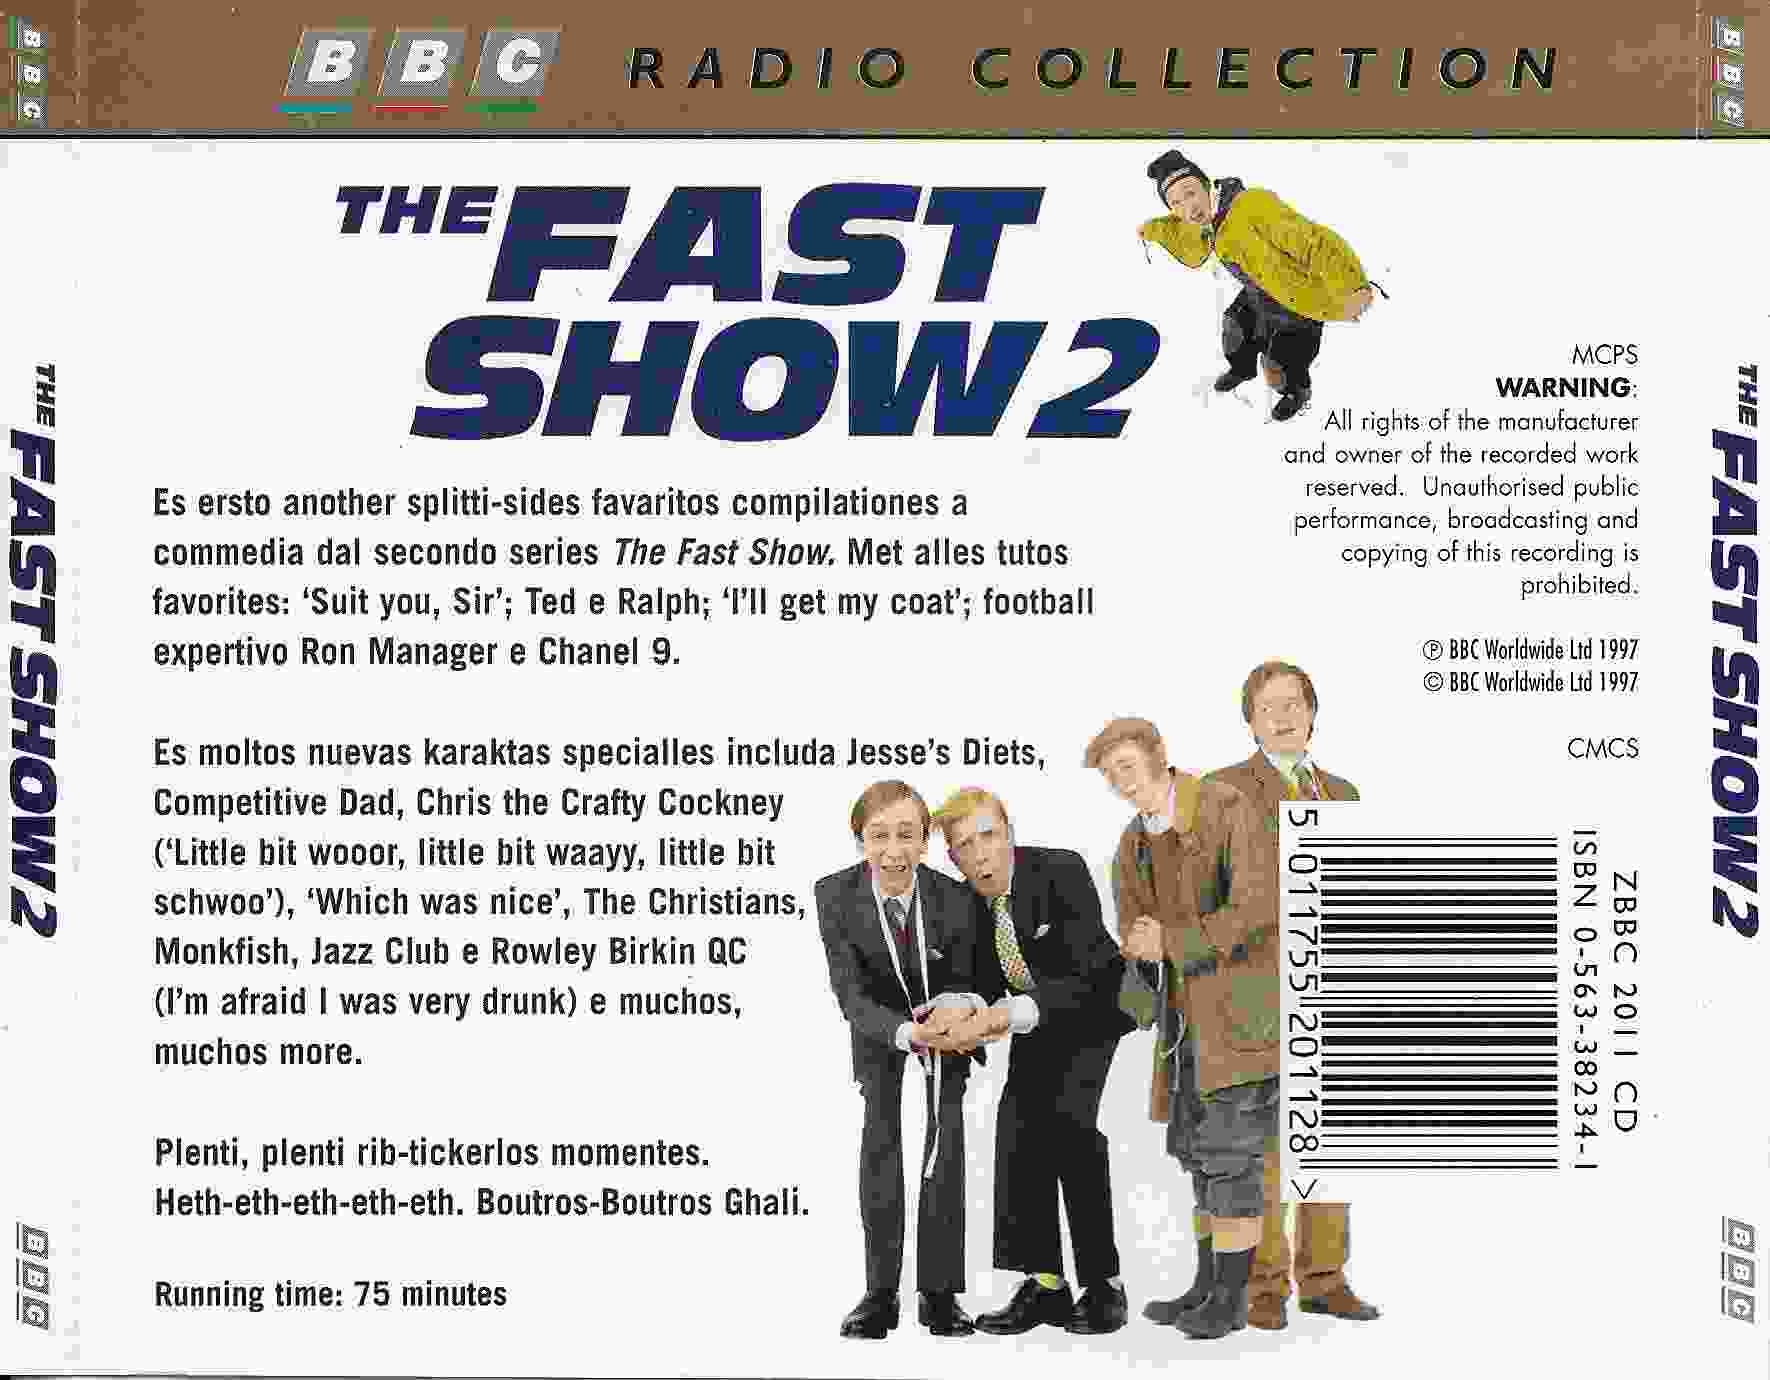 Picture of ZBBC 2011 CD The fast show - Volume 2 by artist Paul Whitehouse / Charlie Higson from the BBC records and Tapes library